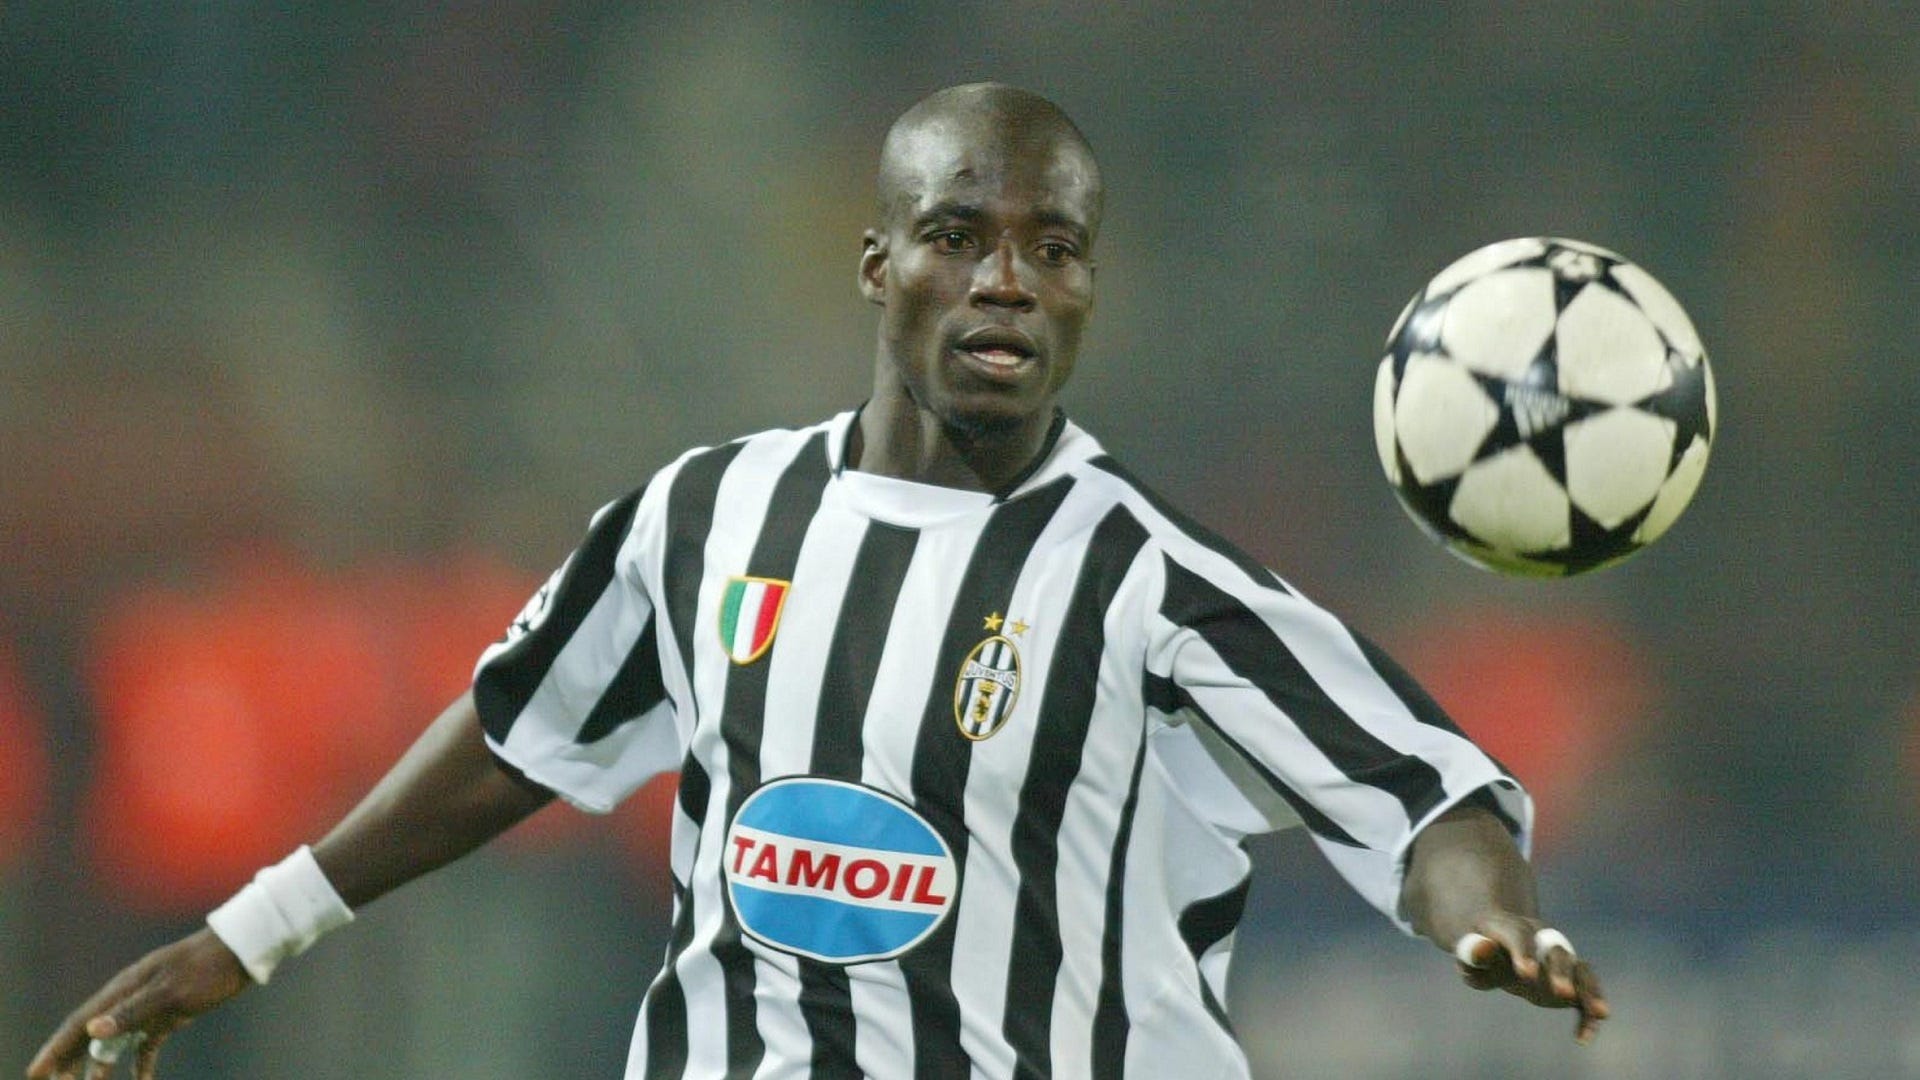 Ex-Juventus star Stephen Appiah opens up on Ghana coaching role, Kwasi Appiah and Andre Ayew | Goal.com Singapore